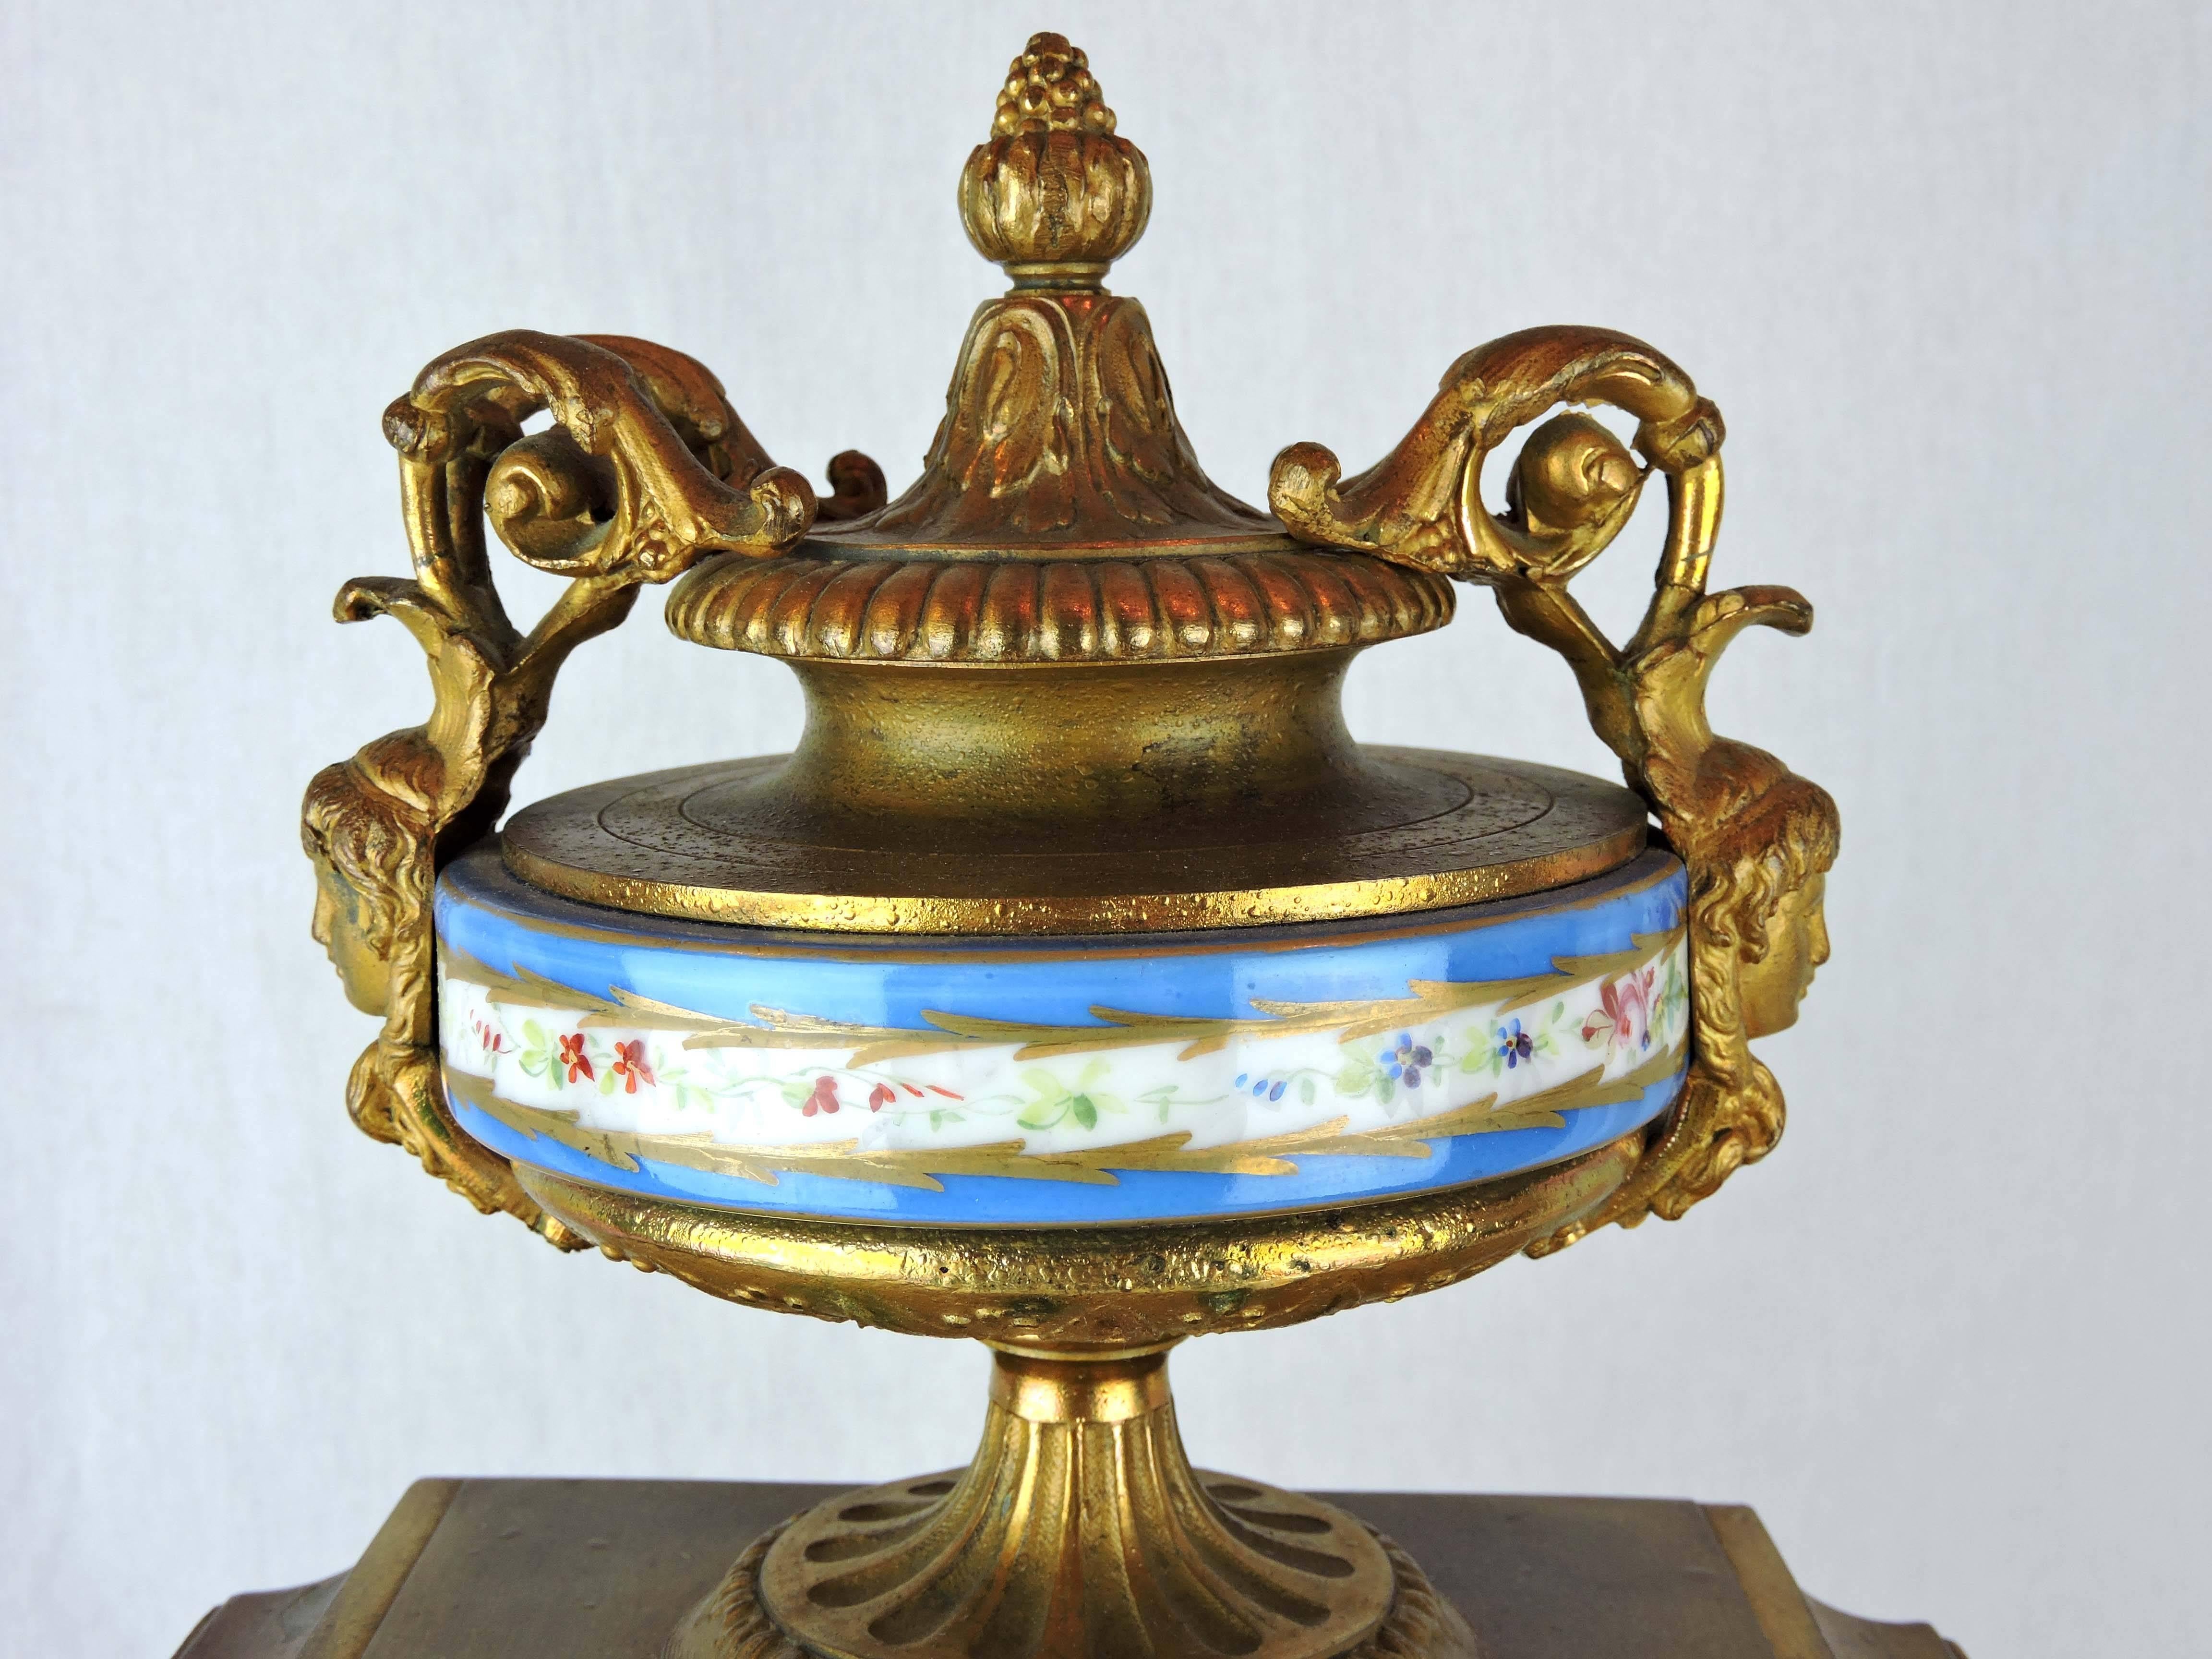 19th Century French Gilt Ormolu and Hand-Painted Porcelain Mantle Clock For Sale 3